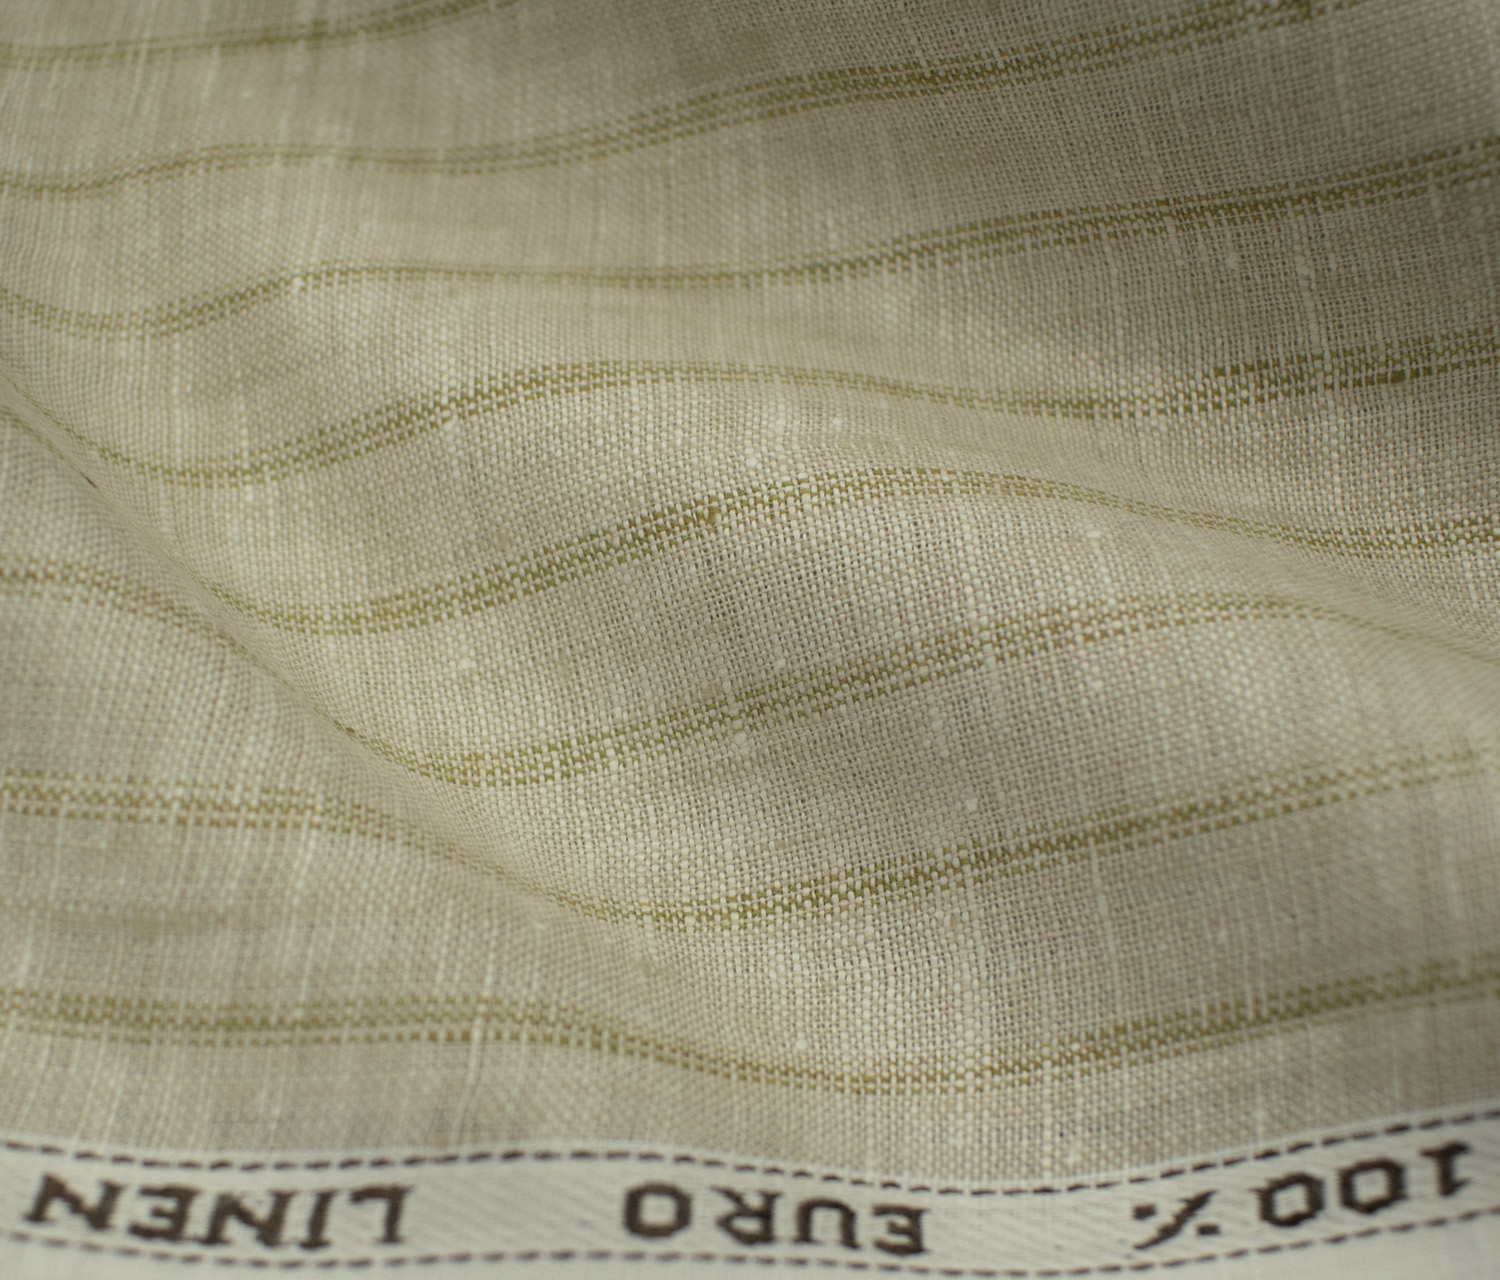 Solino Men's European Linen 60 LEA Striped 2.25 Meter Unstitched Shirting Fabric (Light Brown)